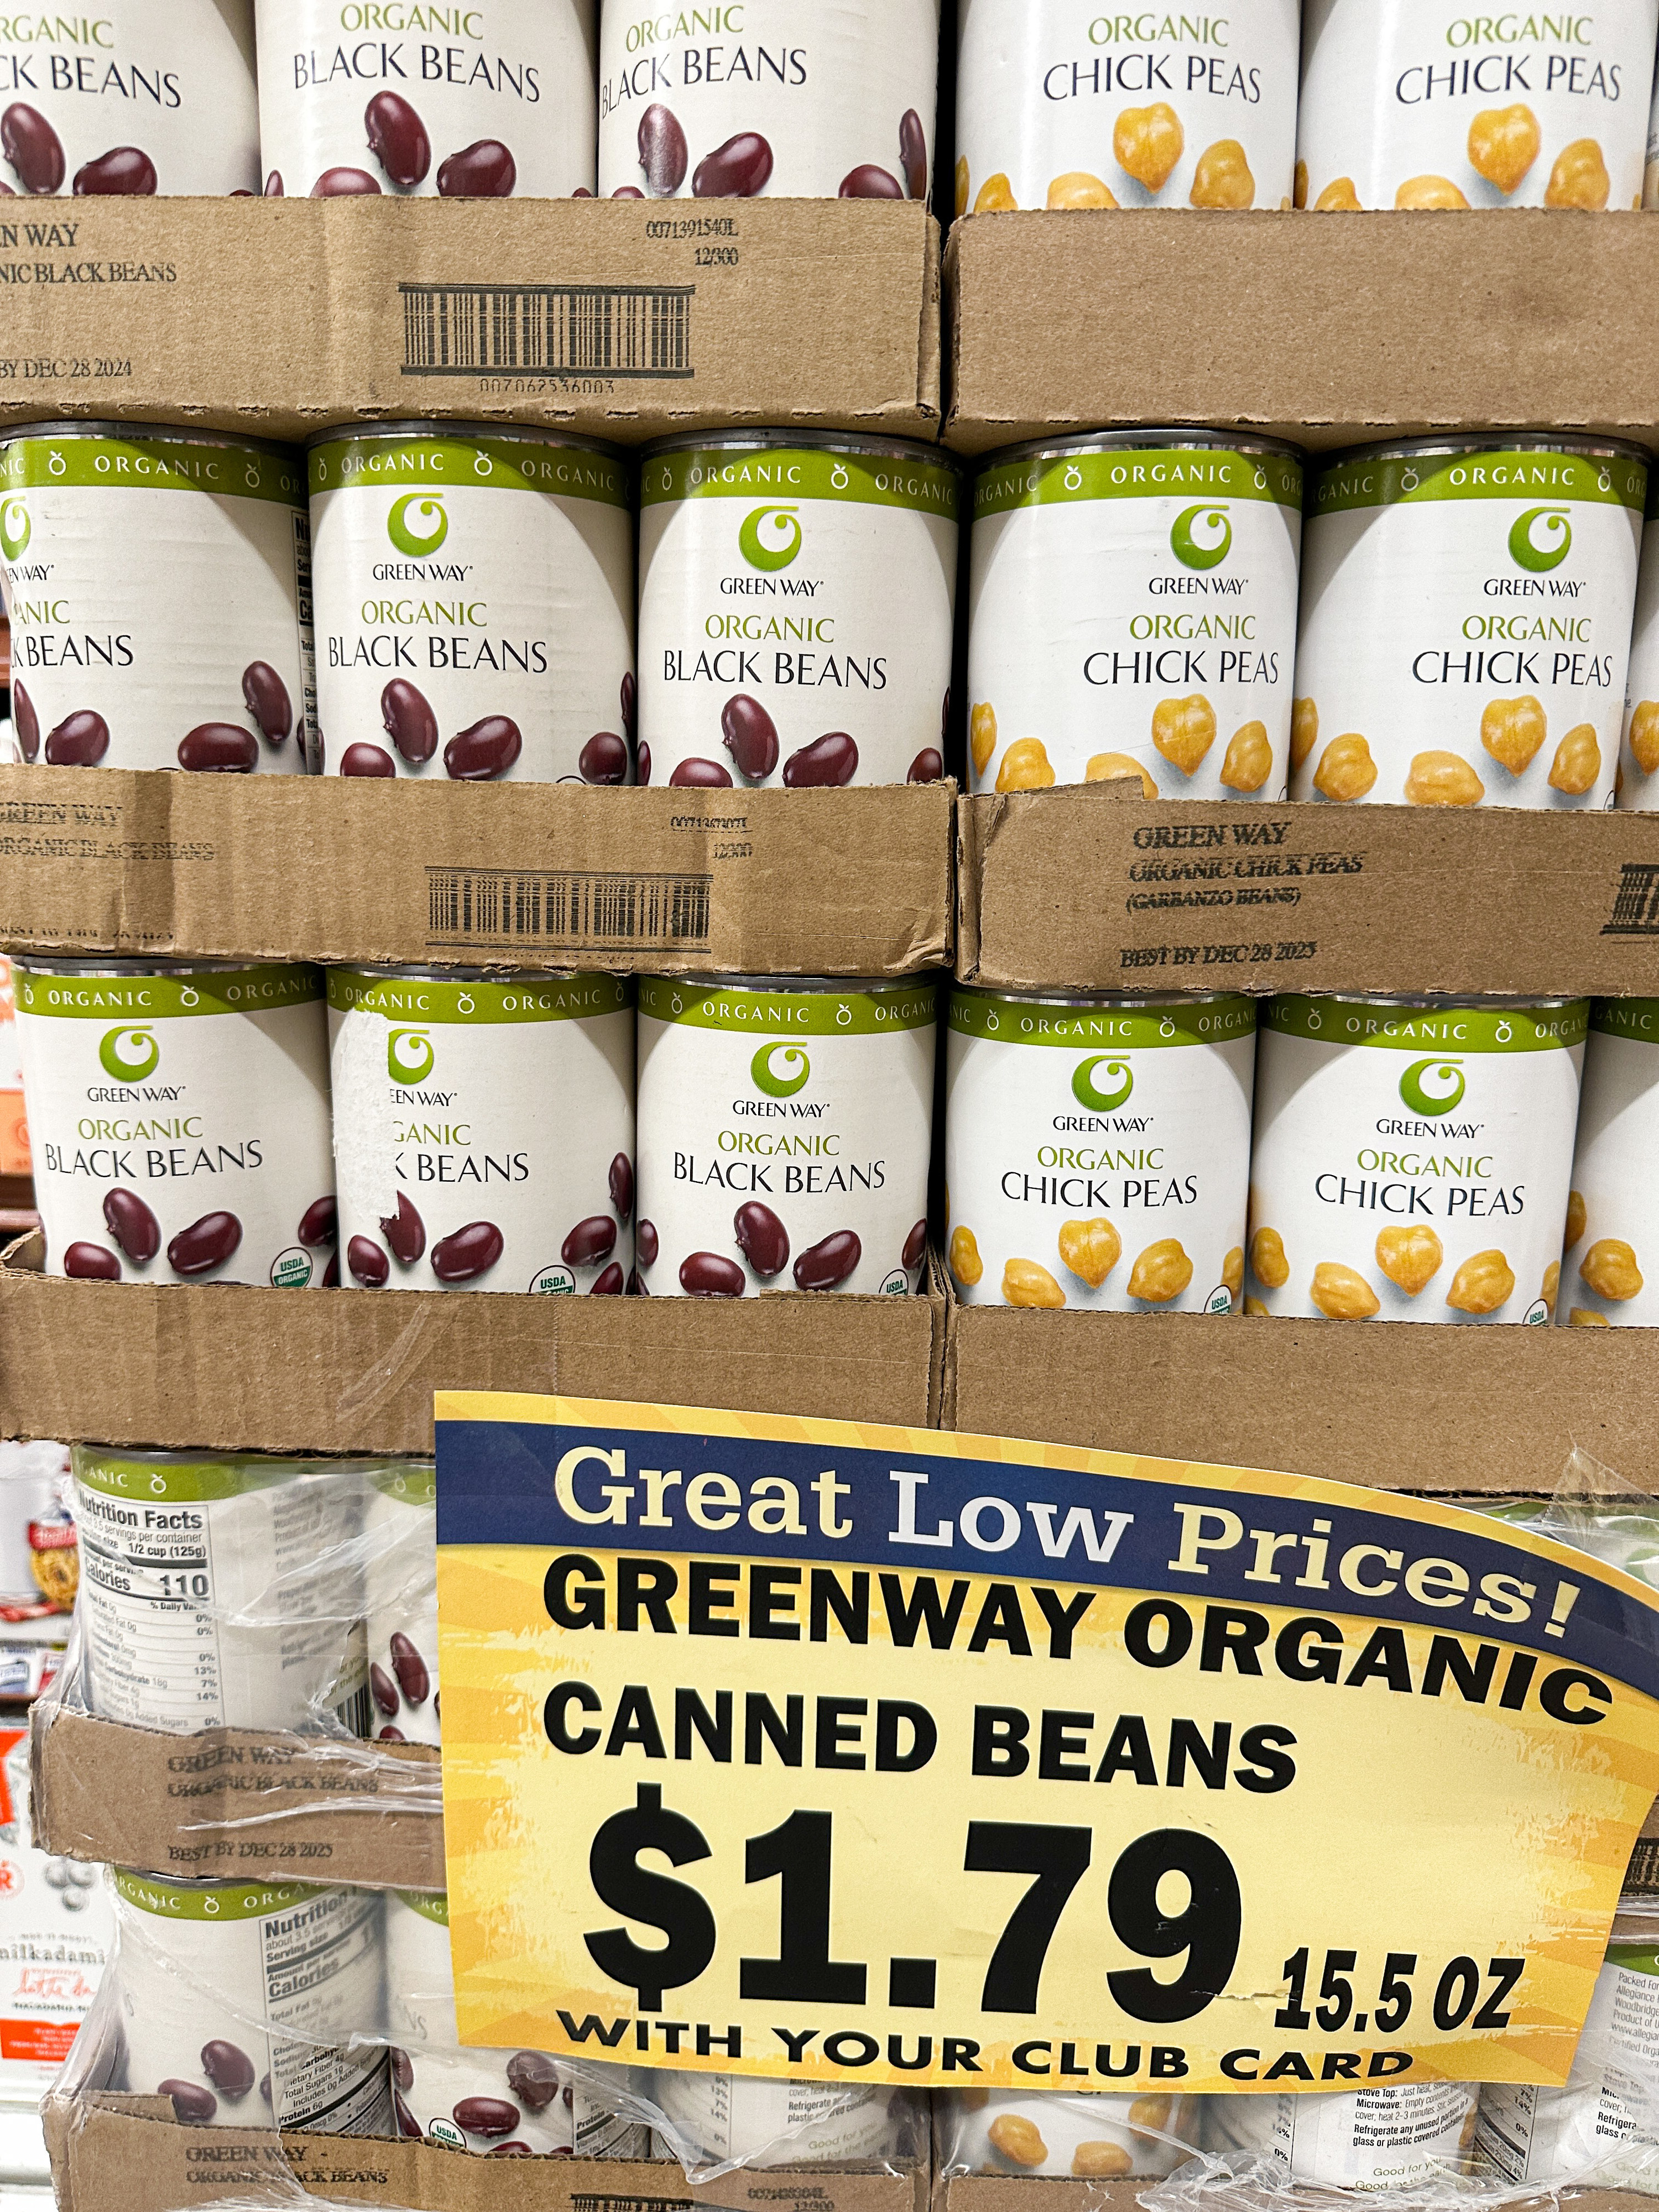 organic canned beans for $1.79